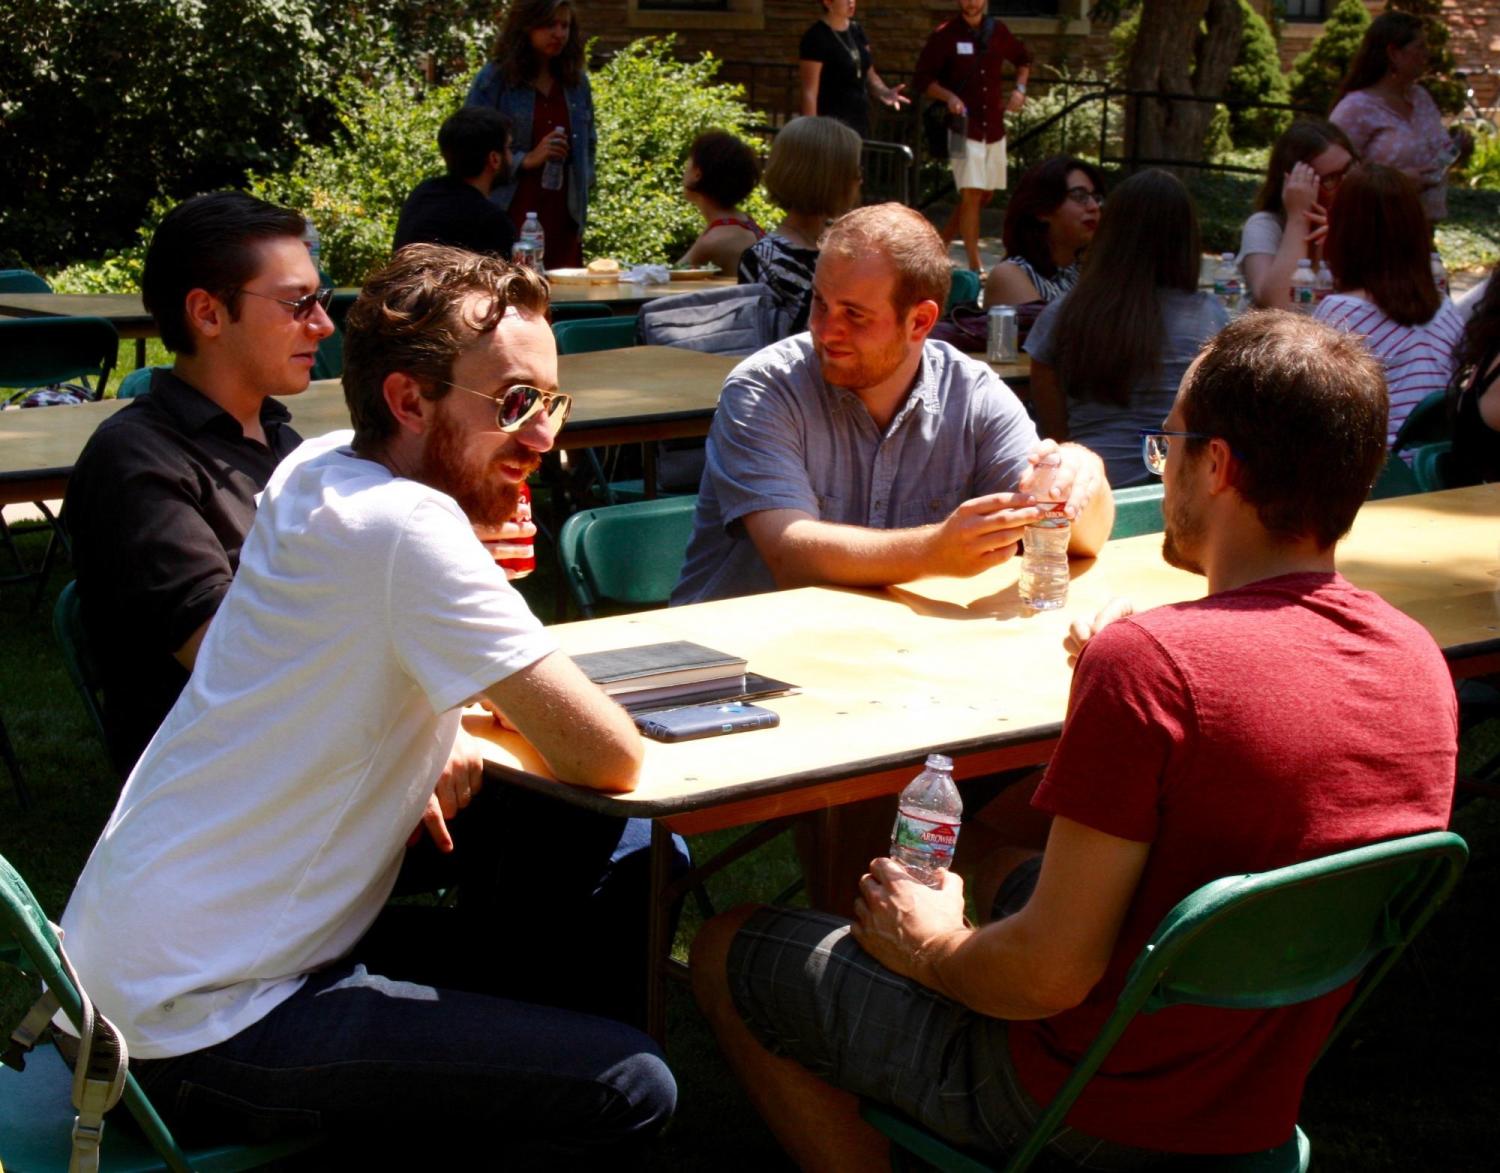 4 male students chatting at a table.